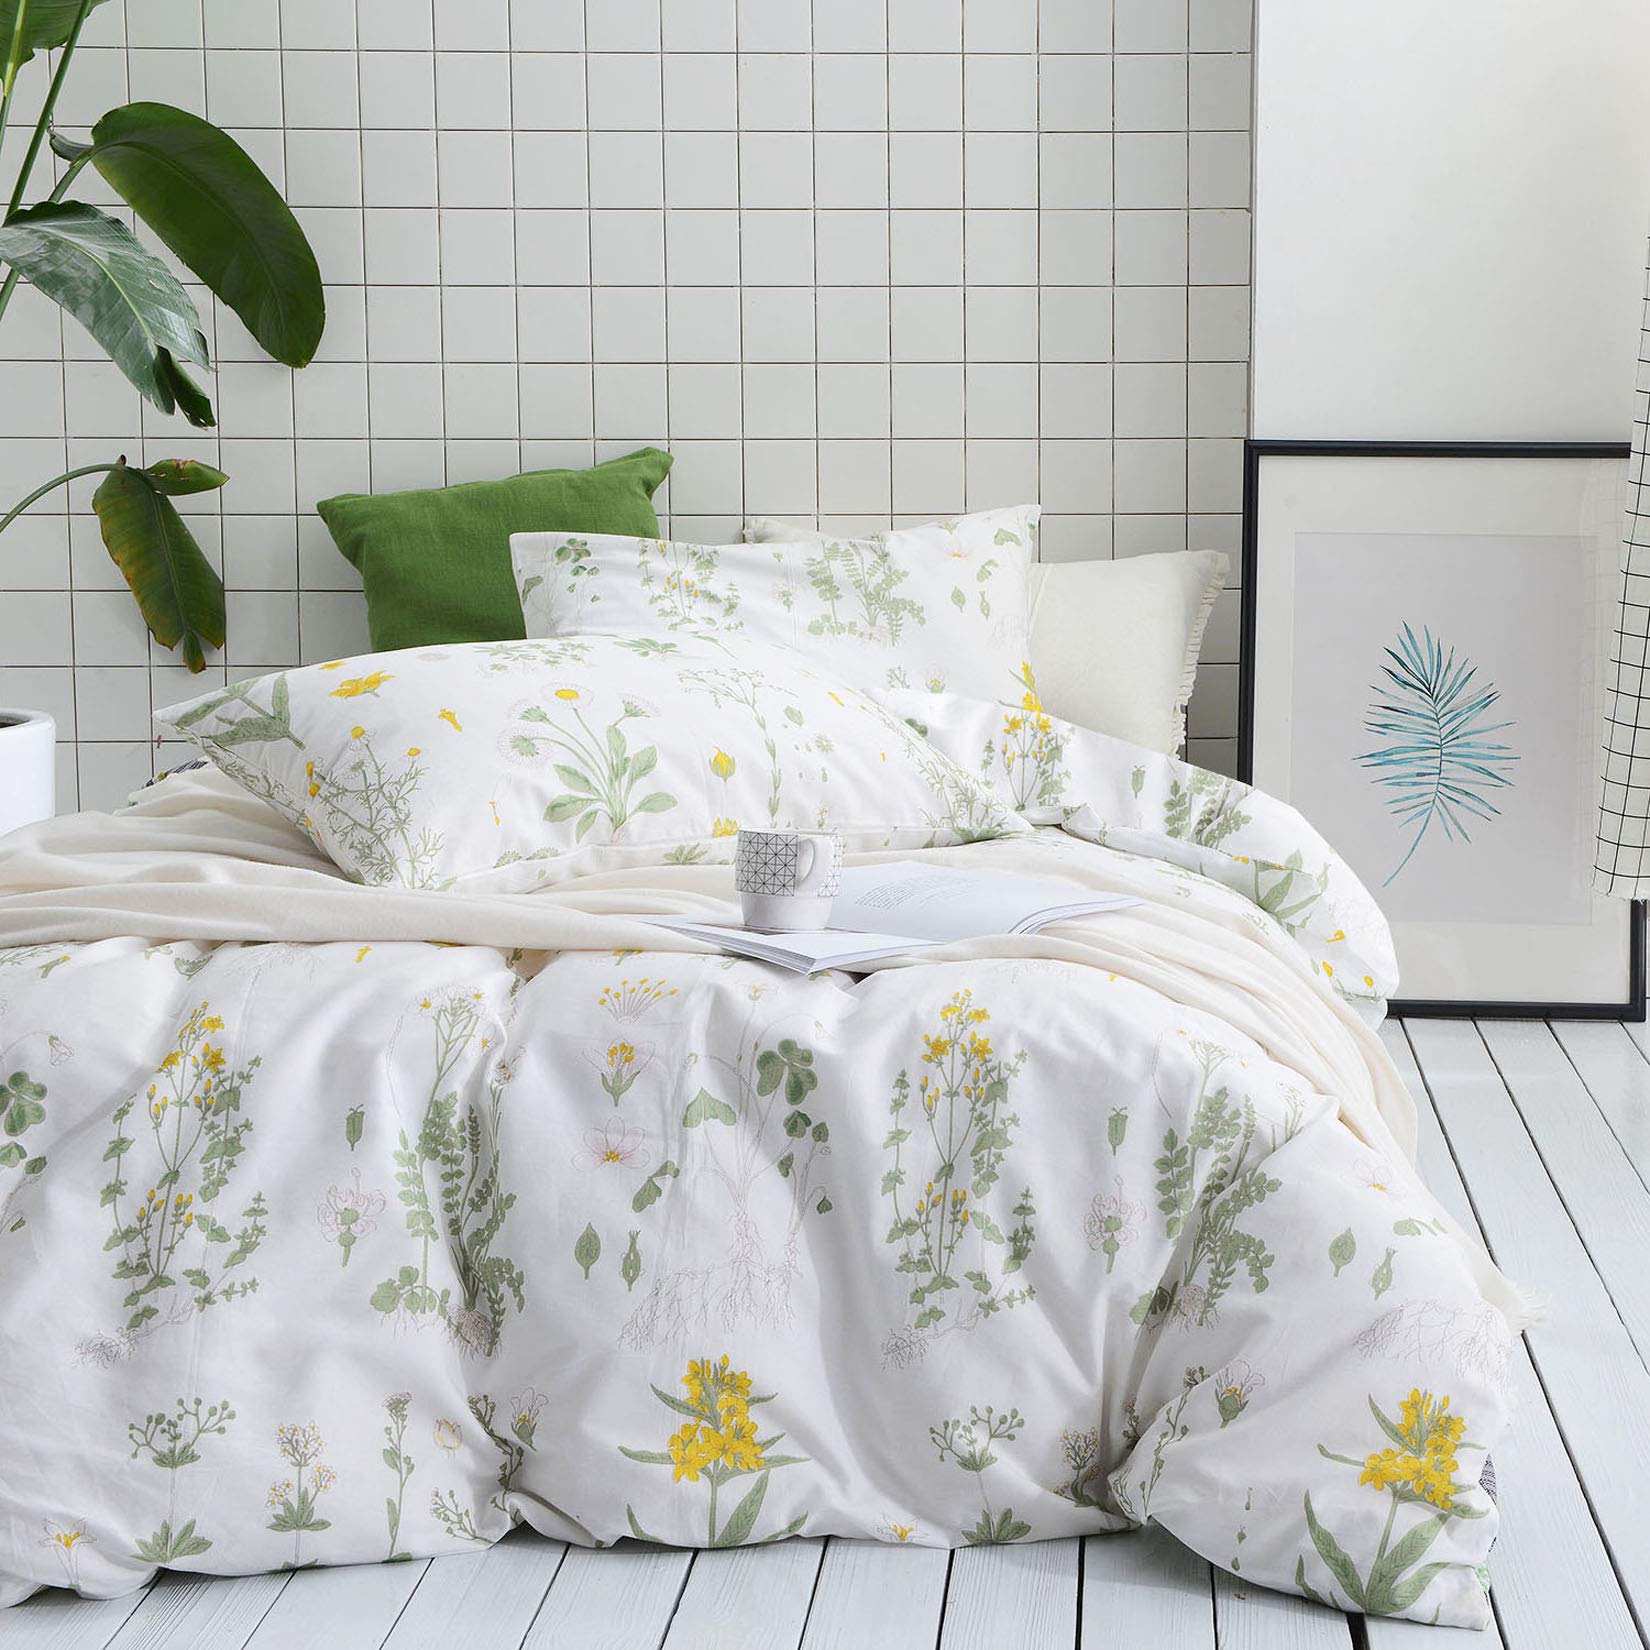 Book Cover Wake In Cloud - Botanical Duvet Cover Set, 100% Cotton Bedding, Yellow Flowers and Green Leaves Floral Garden Pattern Printed on White (3pcs, Twin Size)